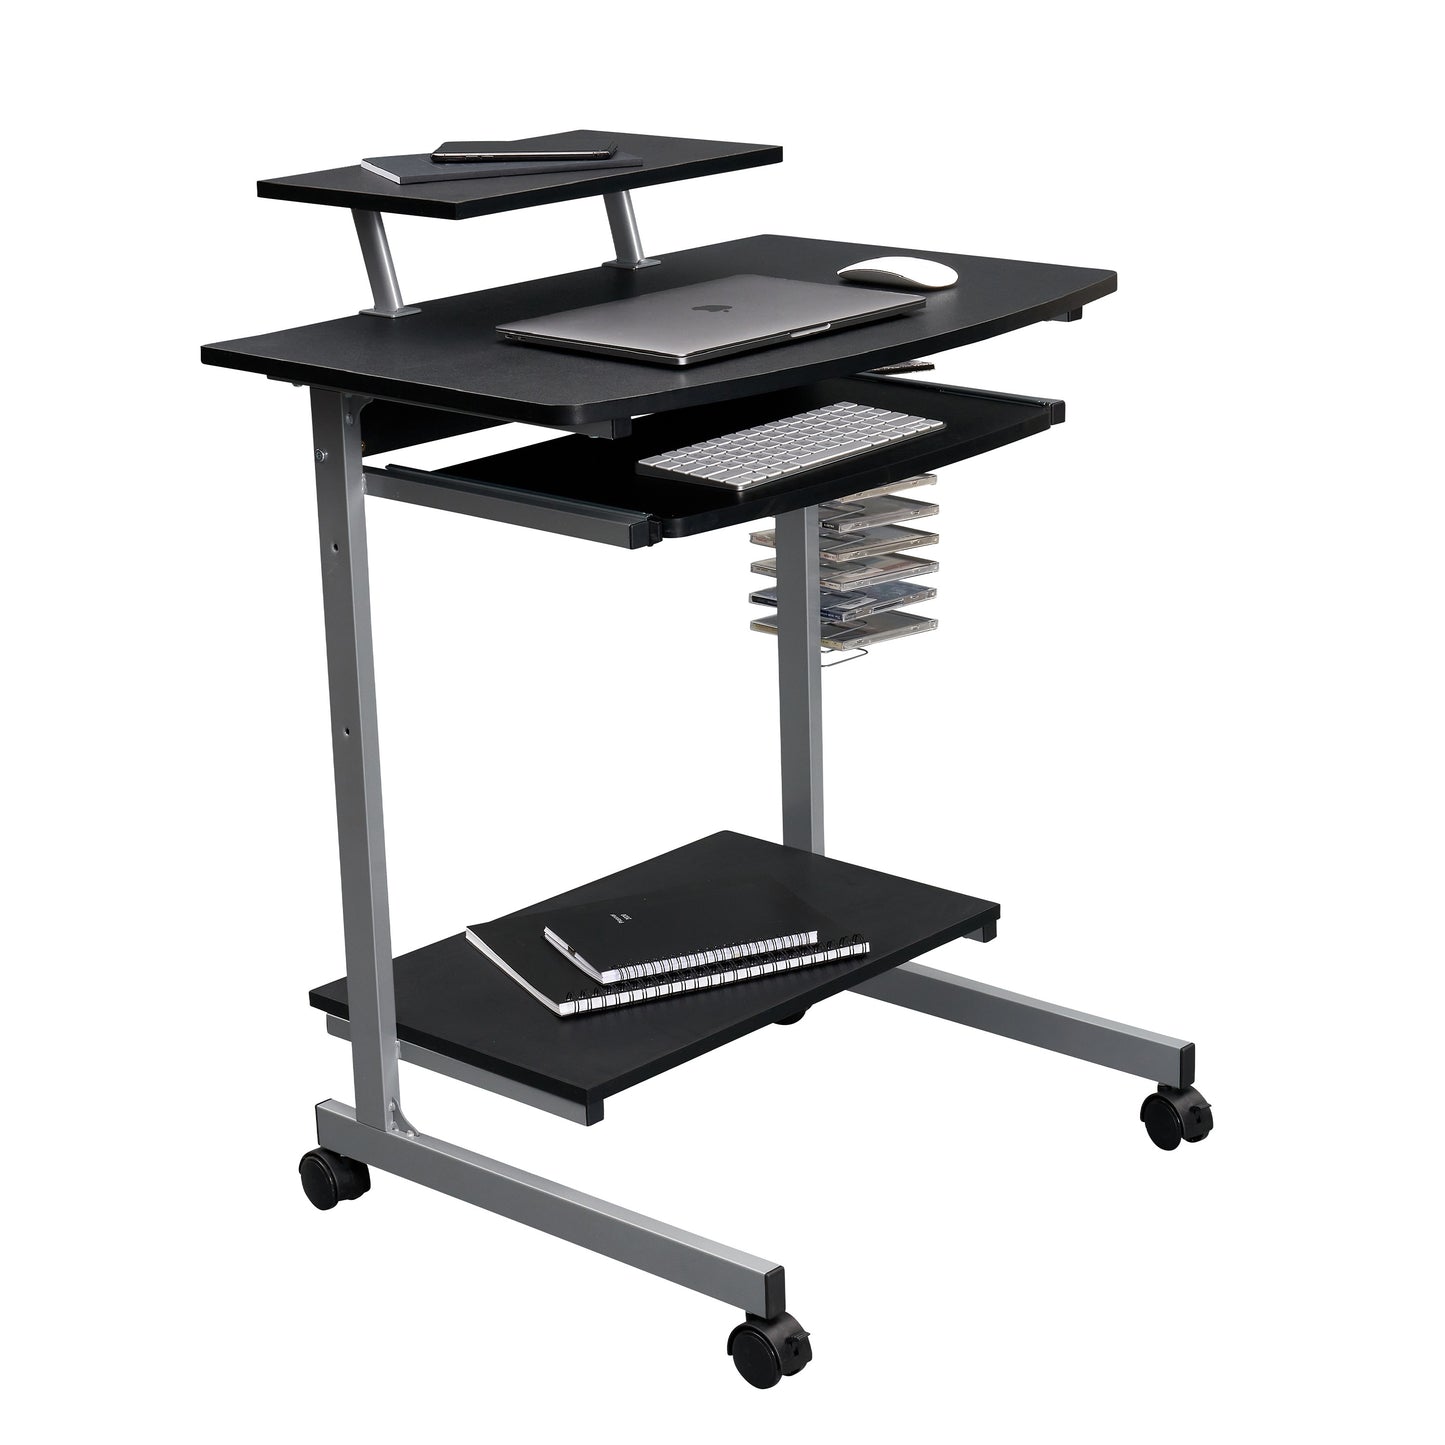 Graphite Compact Computer Cart with Storage and Adjustable Shelves